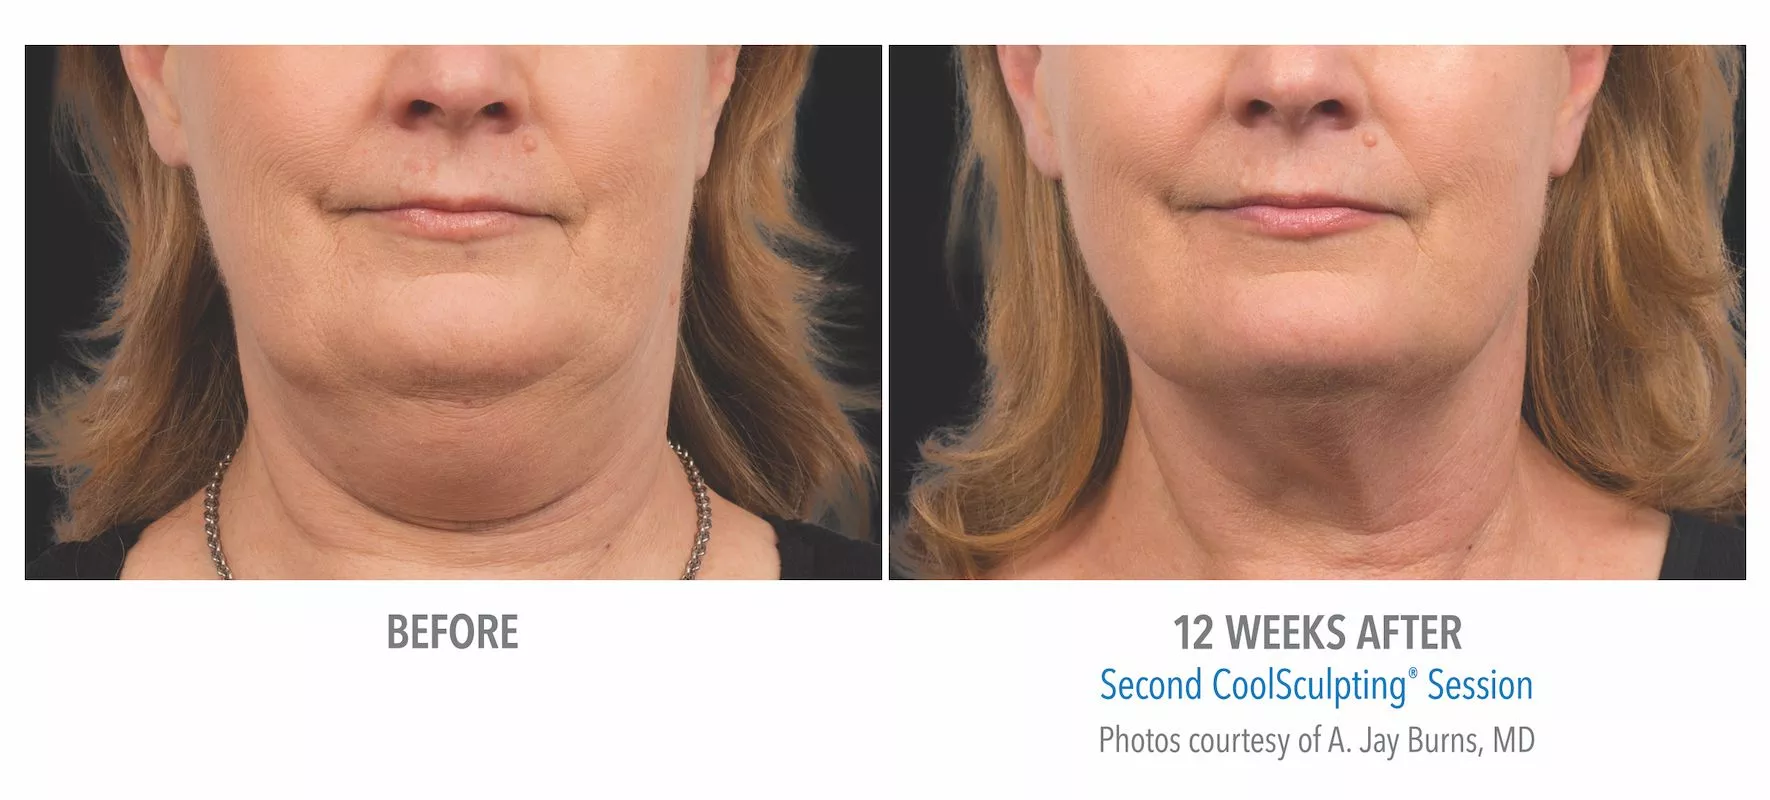 Female CoolSculpting patient in Summerlin. Before and after photo of chin / jawline 12 weeks post CoolSculpting treatment. Patient did not use Kybella.